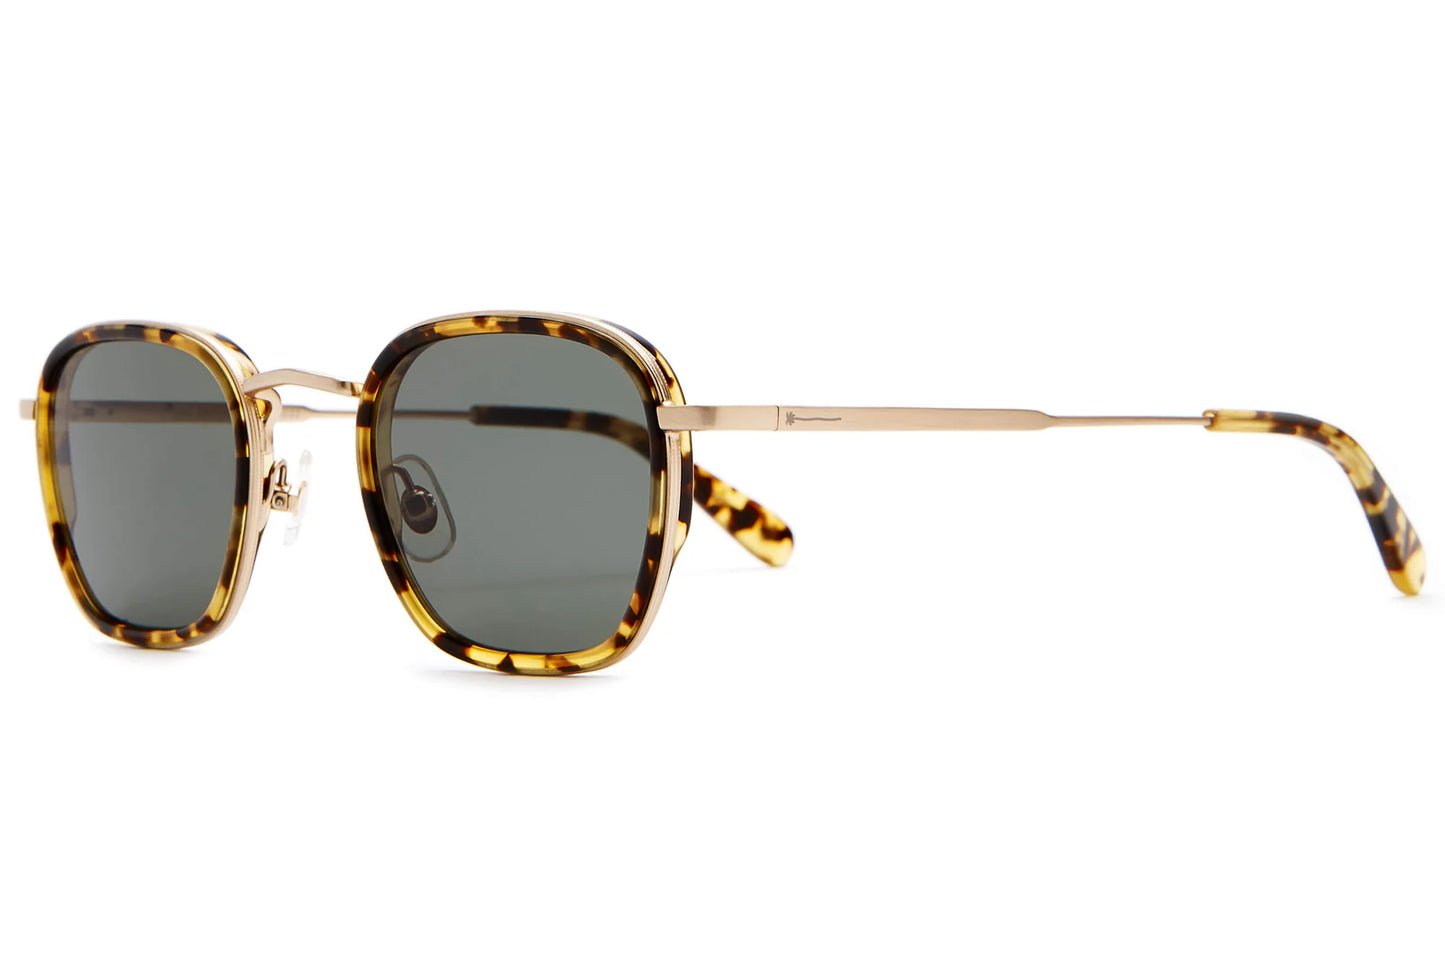 With a smaller frame & laid back style, the Groove Pilot looks great on just about anyone. Handcrafted stainless steel & bioacetate frames—biodegradable, plant-based, earth-friendlier. Rx-ready. crap eyewear brushed gold / tokyo tortoise bio with vintage green lens